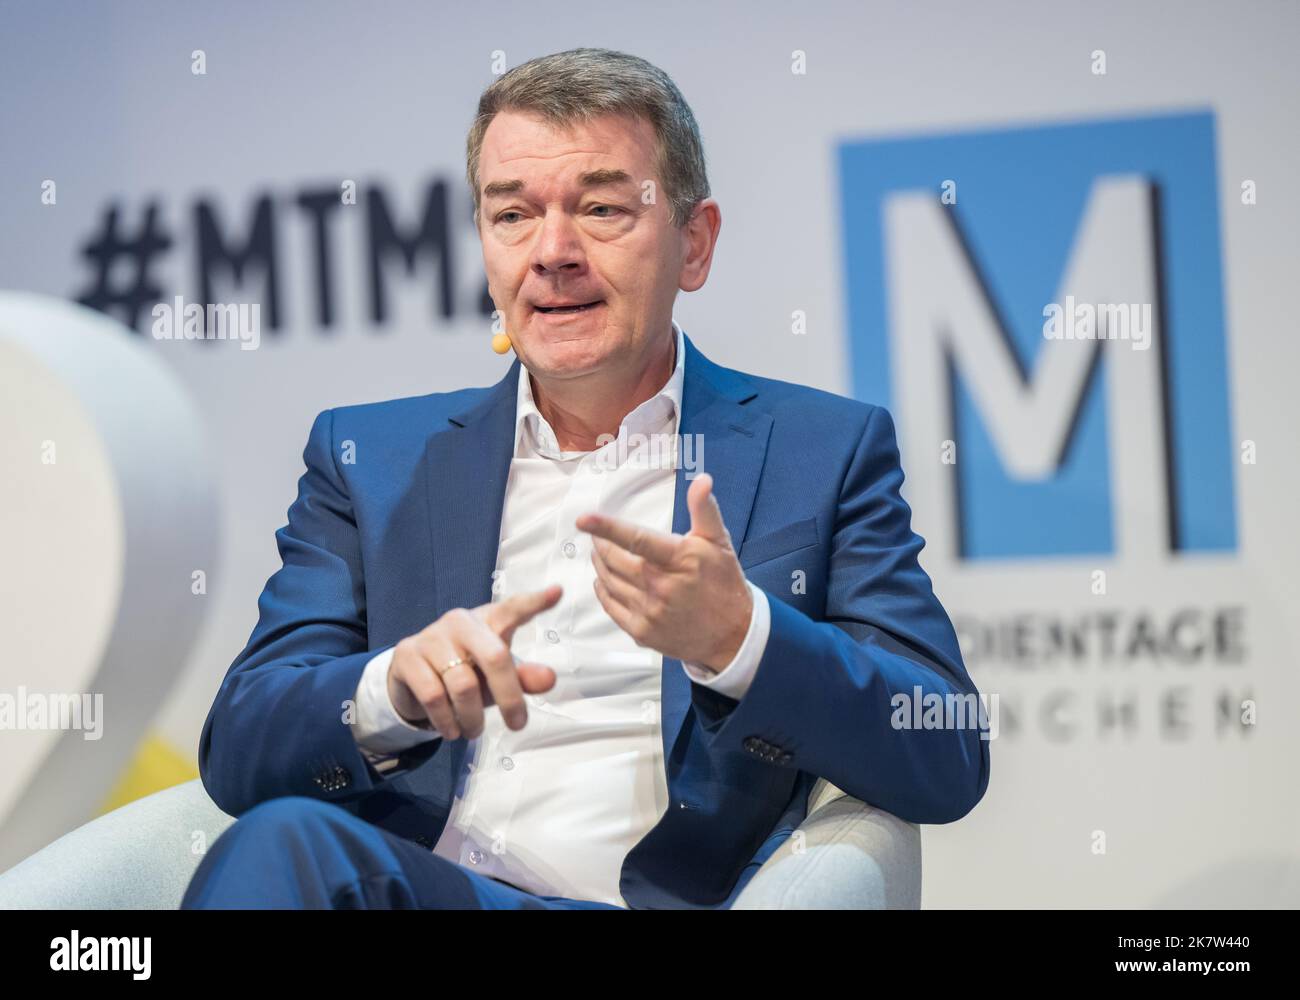 FILED - 19 October 2022, Bavaria, Munich: Jörg Schönenborn, Program Director Information, Fiction and Entertainment at WDR, will take part in the continuation of the 36th Munich Media Days. The conference will take place as a face-to-face event. Photo: Peter Kneffel/dpa Stock Photo